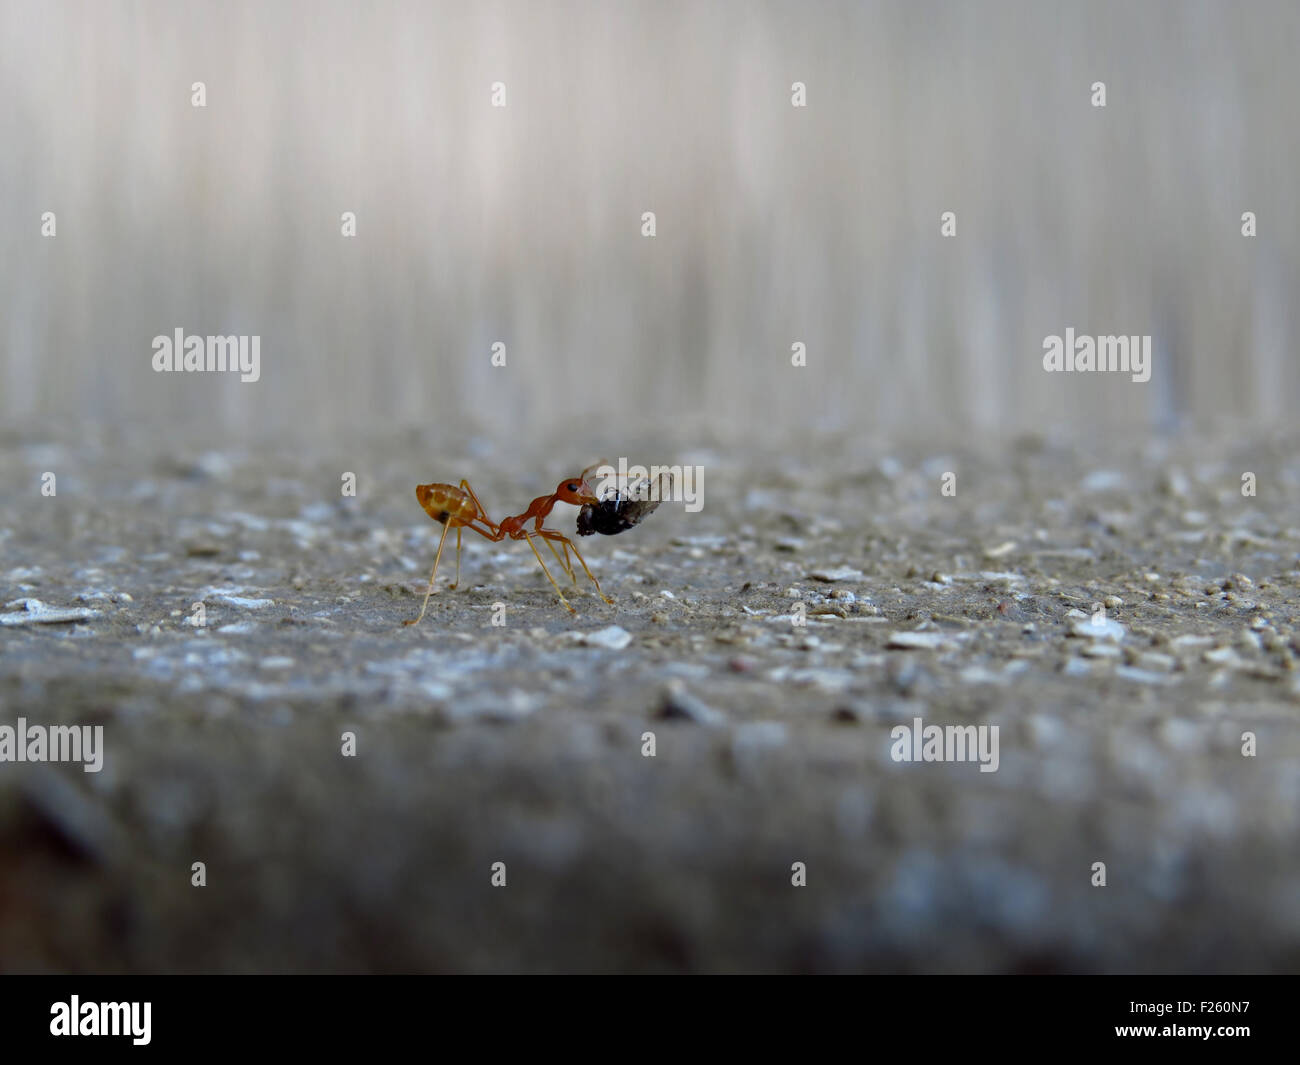 A macro shot of a hard working red worker ant carrying its meal of fly Stock Photo